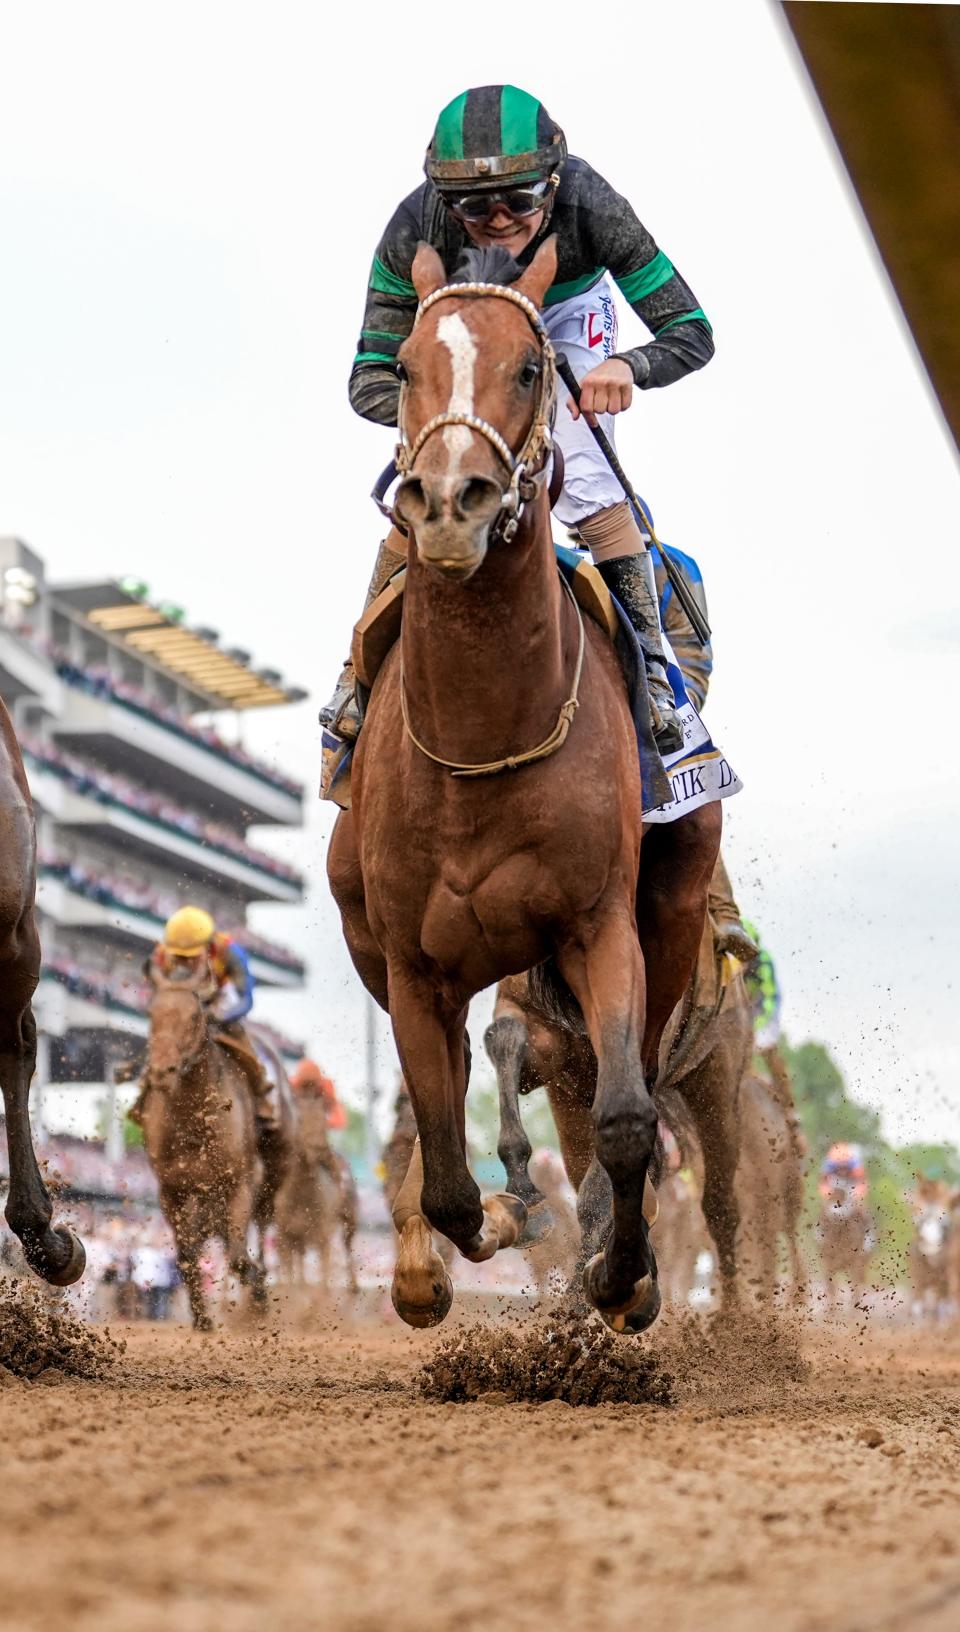 Mystik Dan, right, wins the Kentucky Derby in a photo finish on Saturday, May 4, 2024.